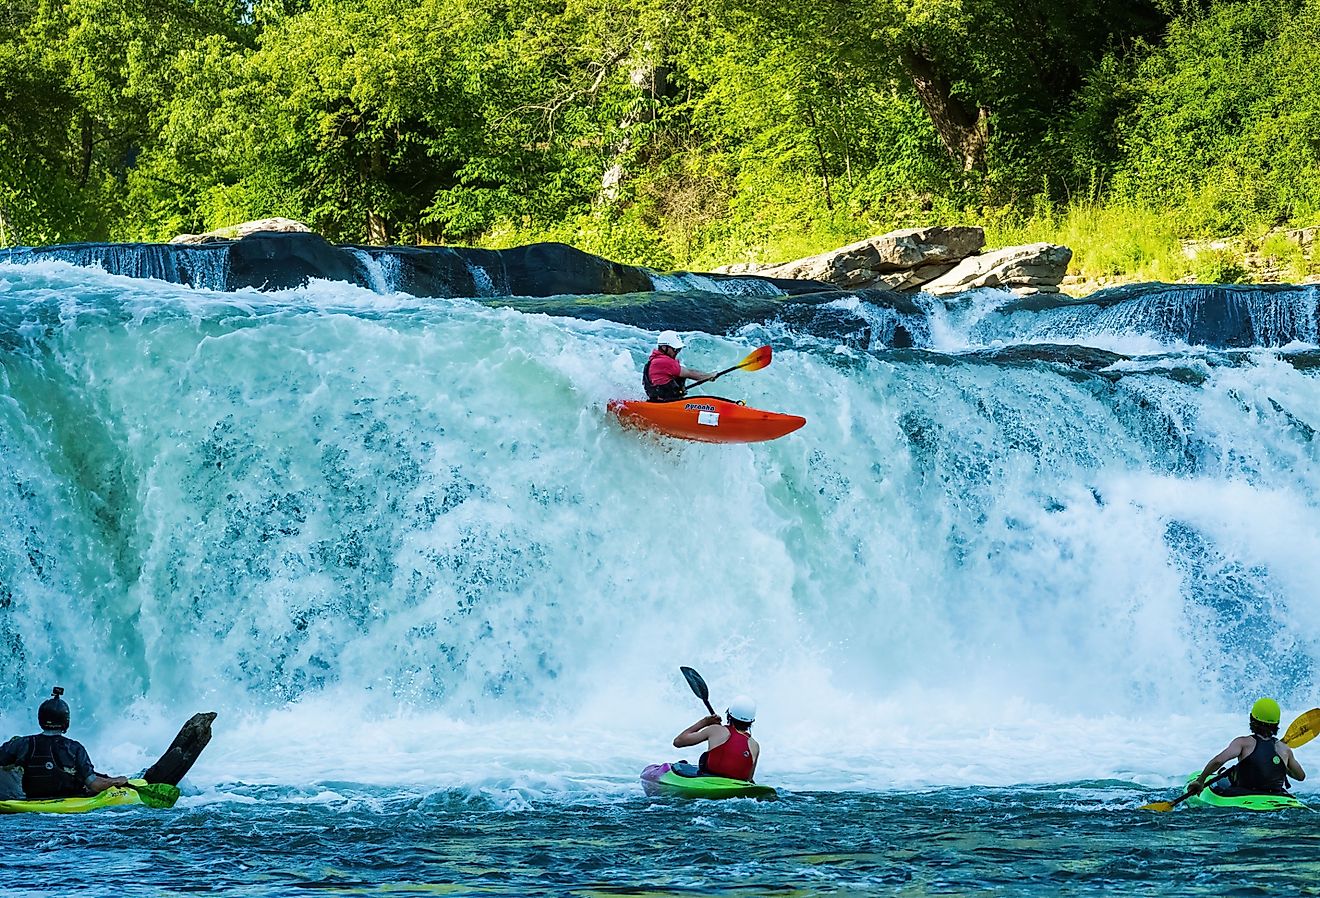 Group of kayakers going over Ohiopyle Falls in Ohiopyle, PA. Image credit Marked Imagery via Shutterstock.